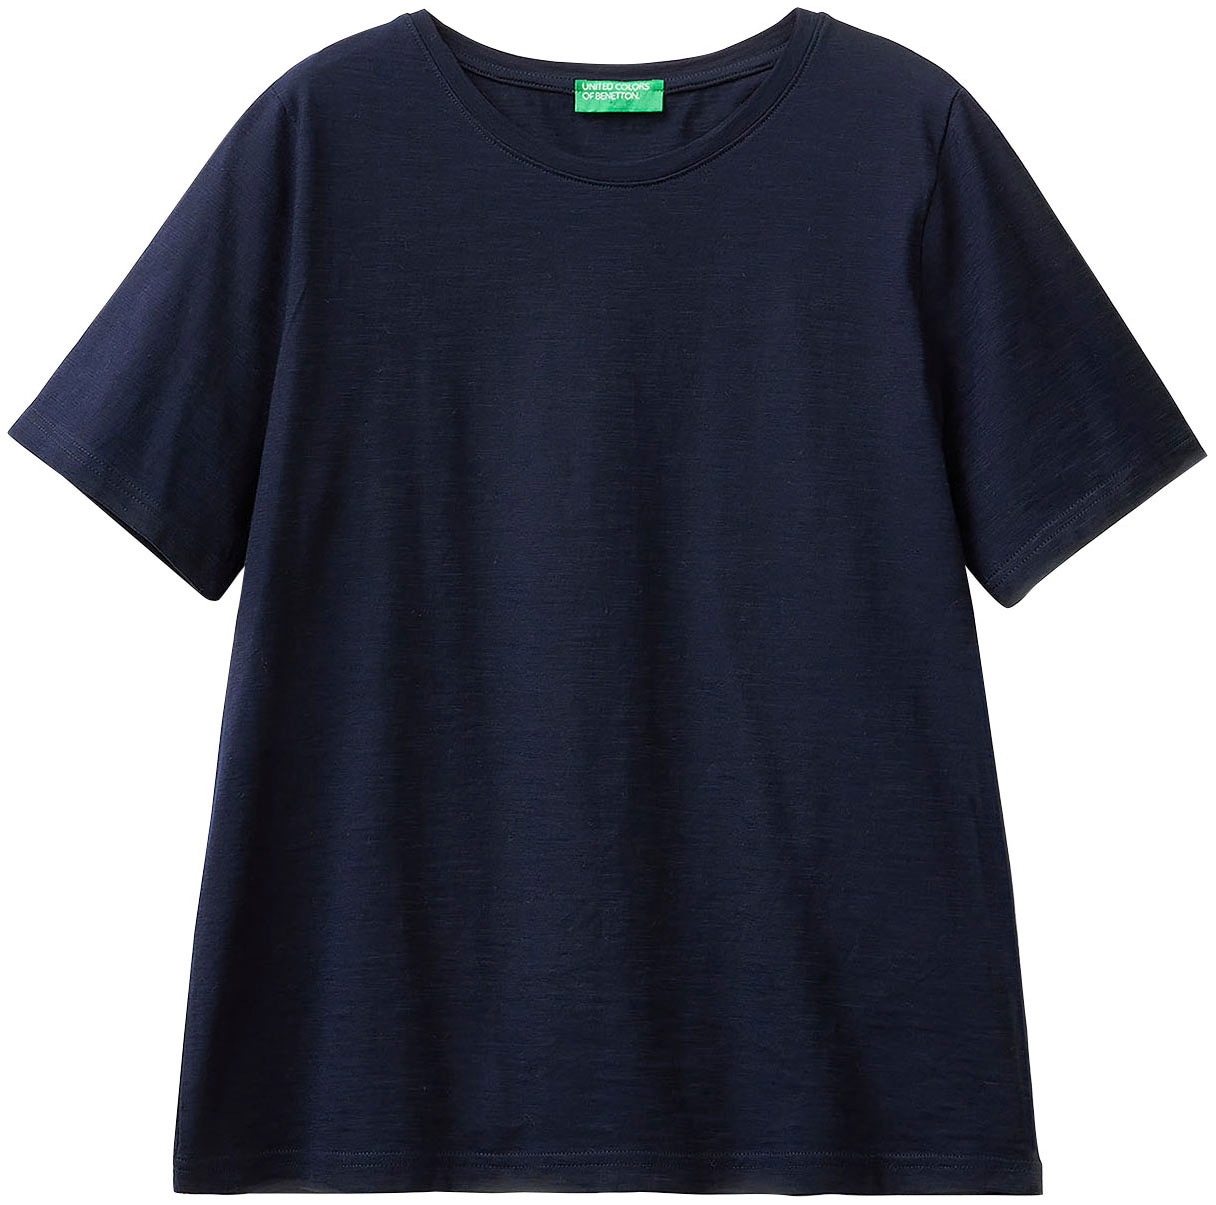 ♕ in Basic-Optik cleaner United Colors Benetton of T-Shirt, bei